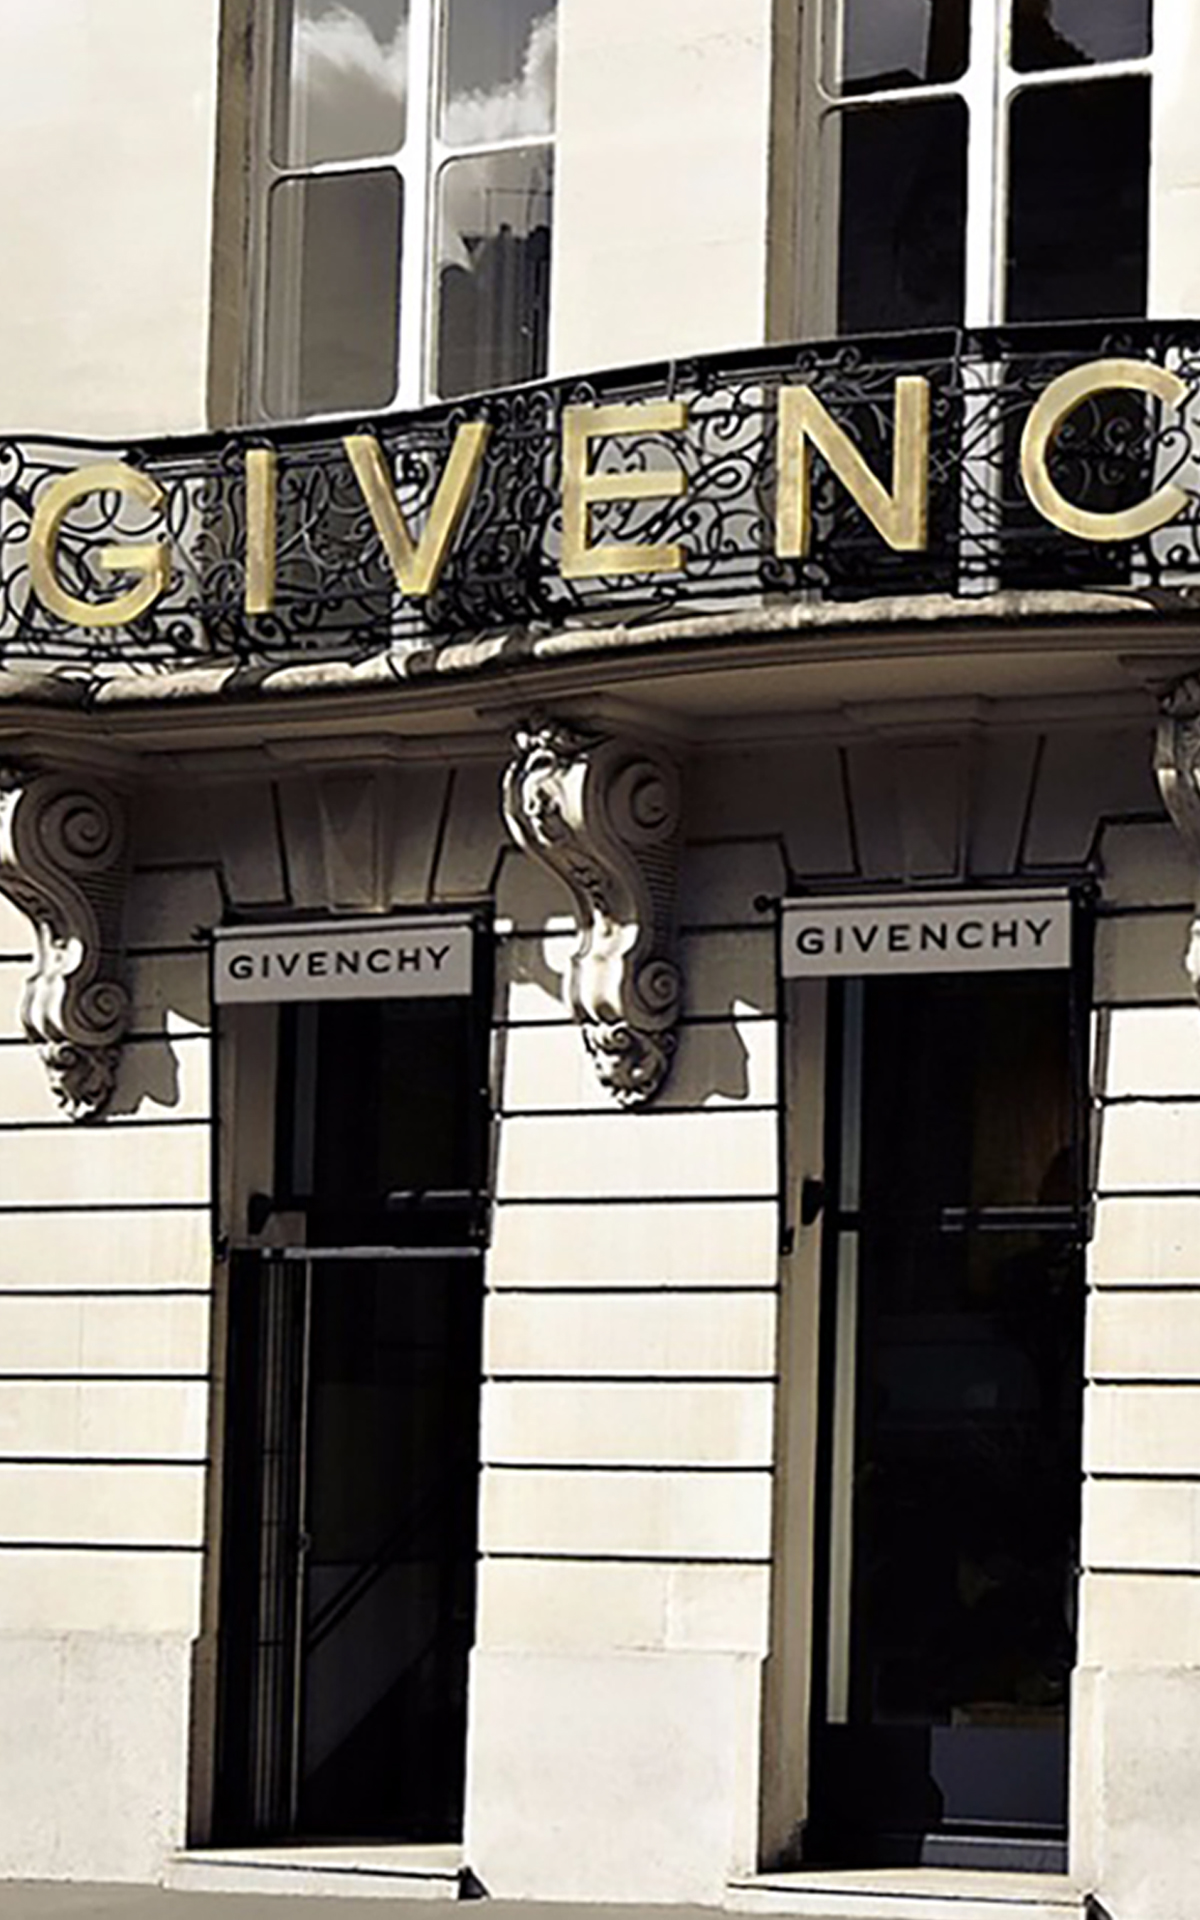 givency outlet